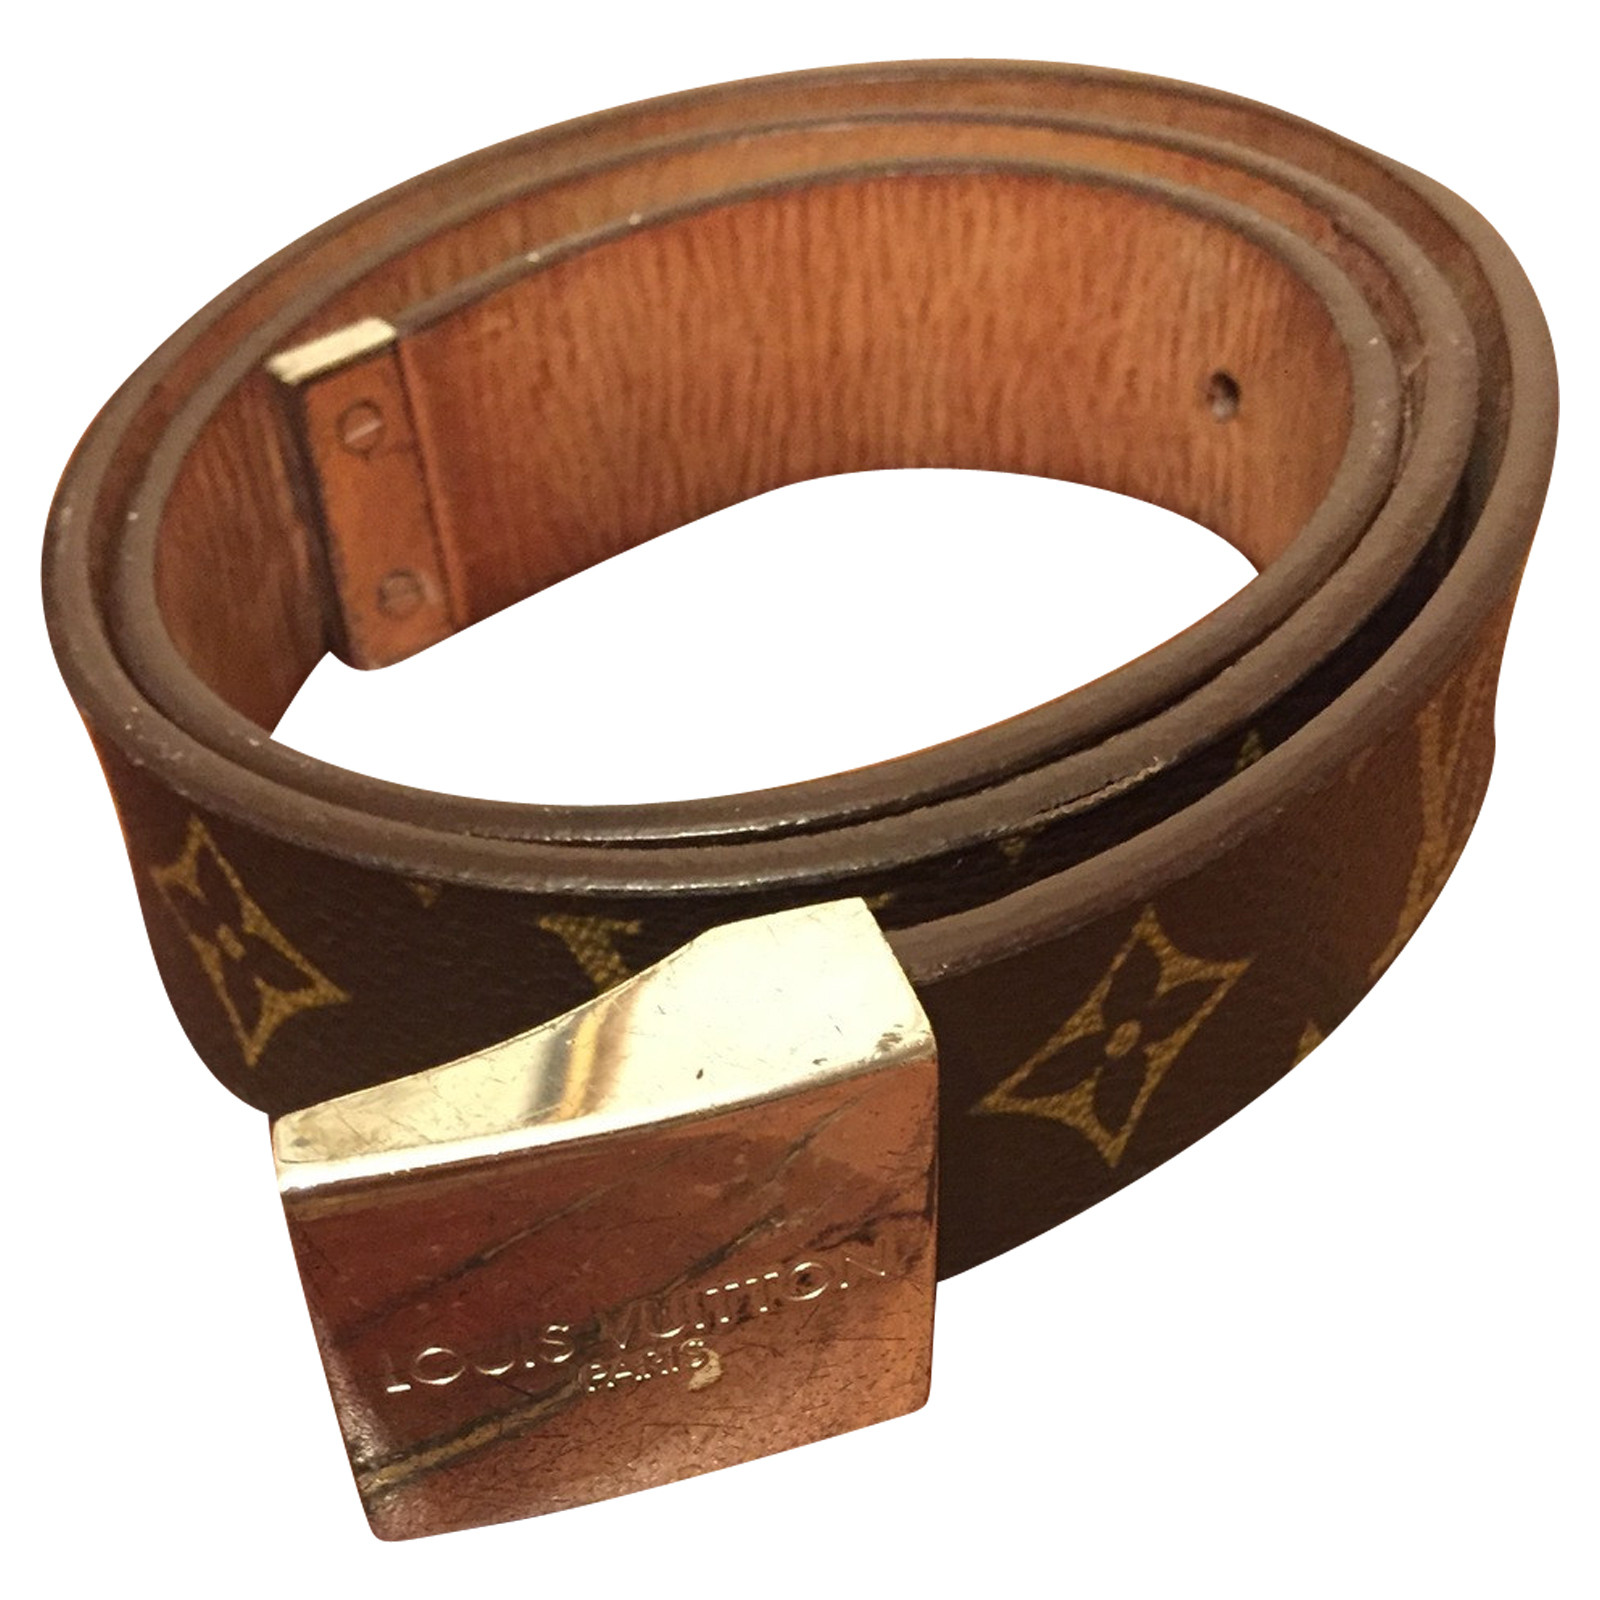 Louis Vuitton Leather in - Second Hand Louis Vuitton Belt Leather in Brown buy used for 189€